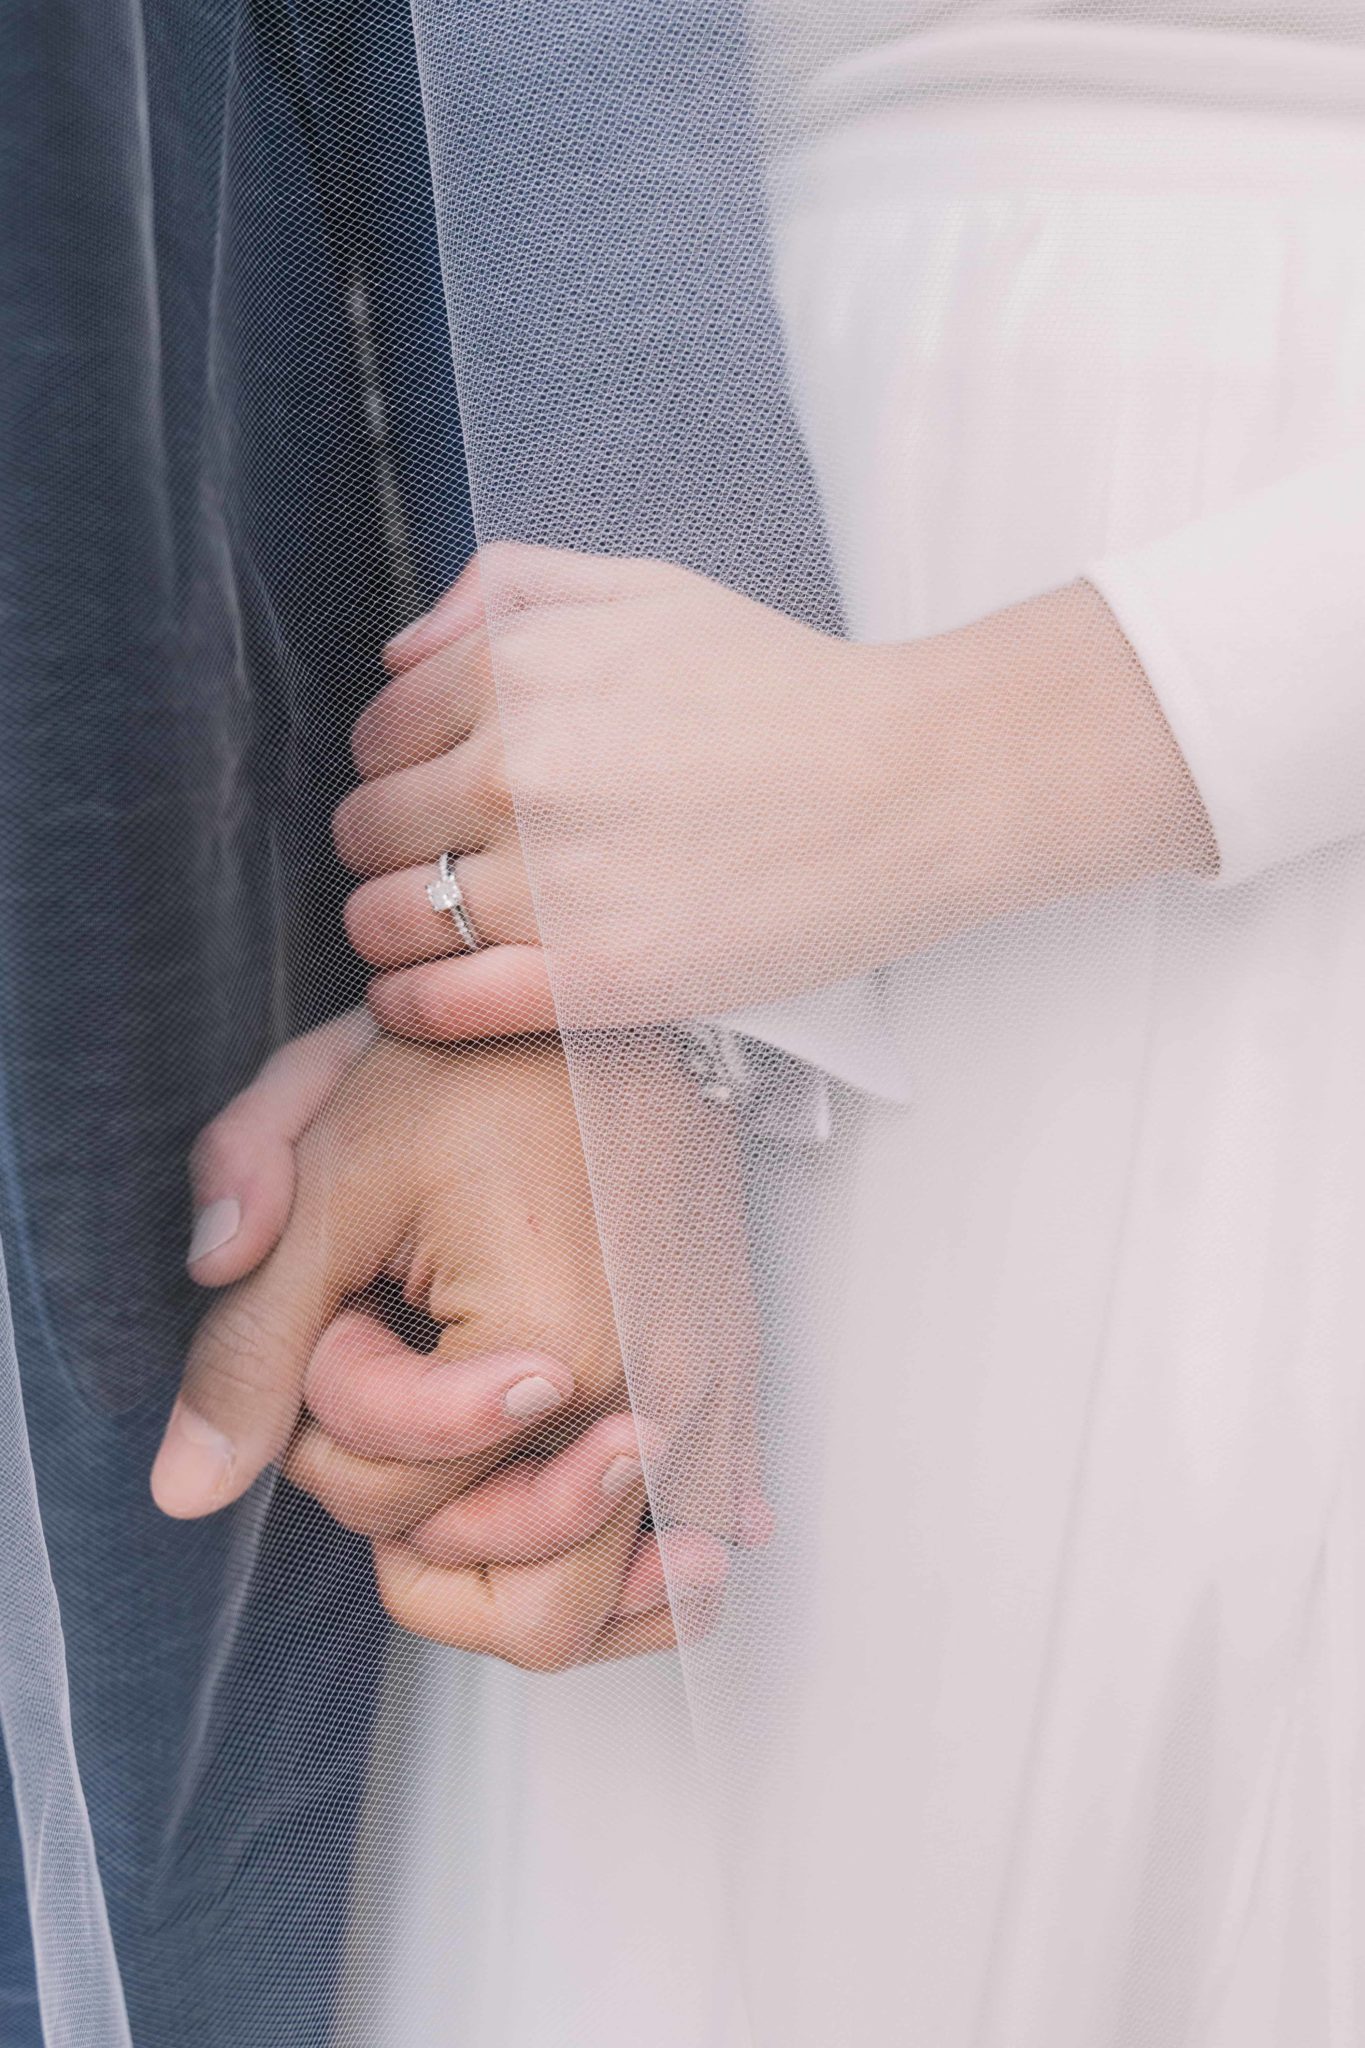 Holding hands during wedding